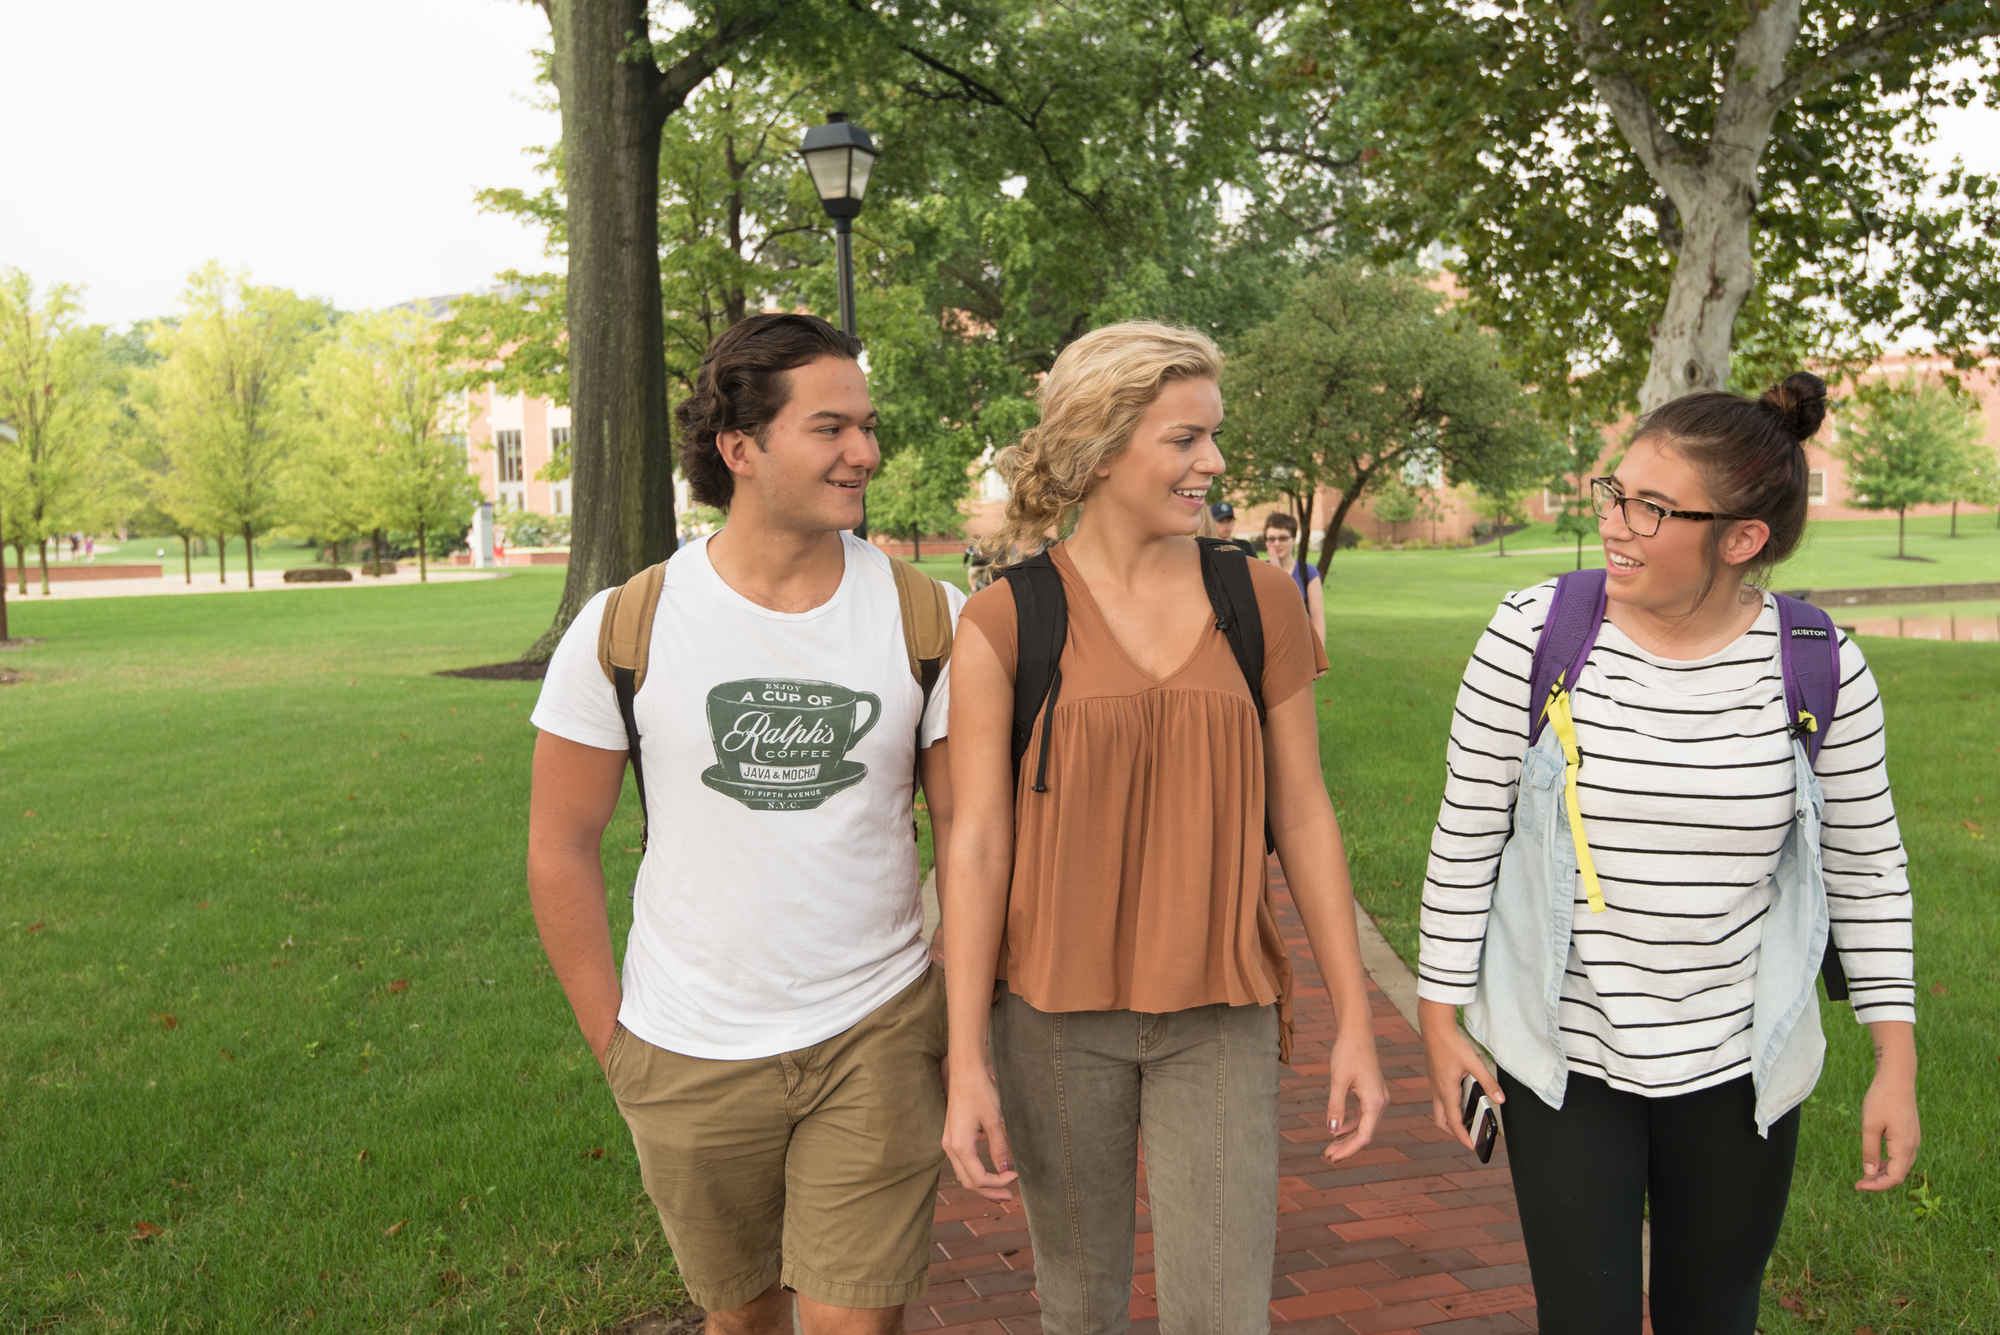 Students walking on campus at the University of Mount Union.